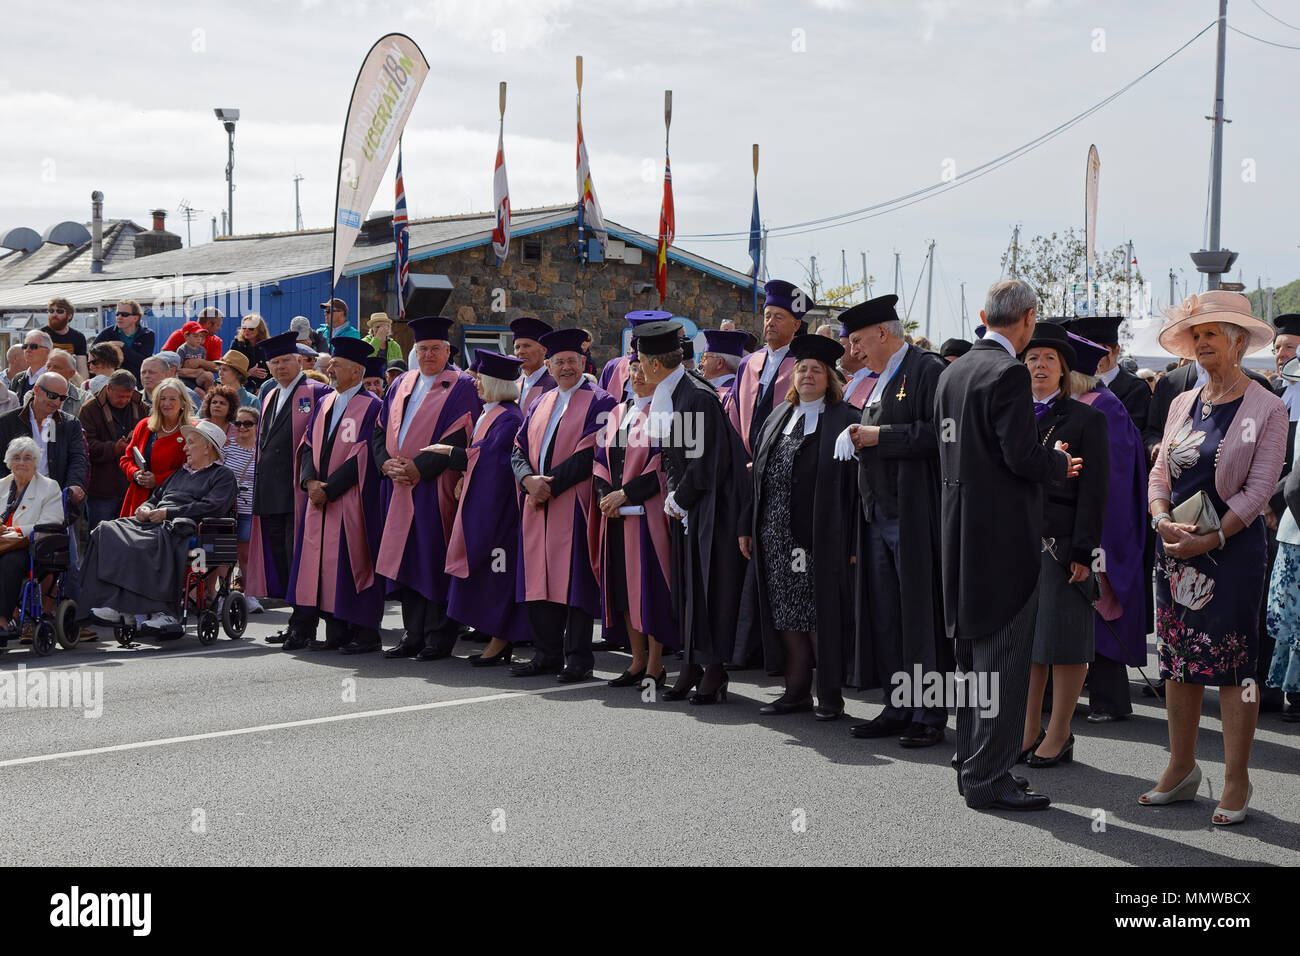 Guernsey's Jurats in purple robes wait to begin their procession during Guernseys 73rd Liberation Day Celebrations. Stock Photo